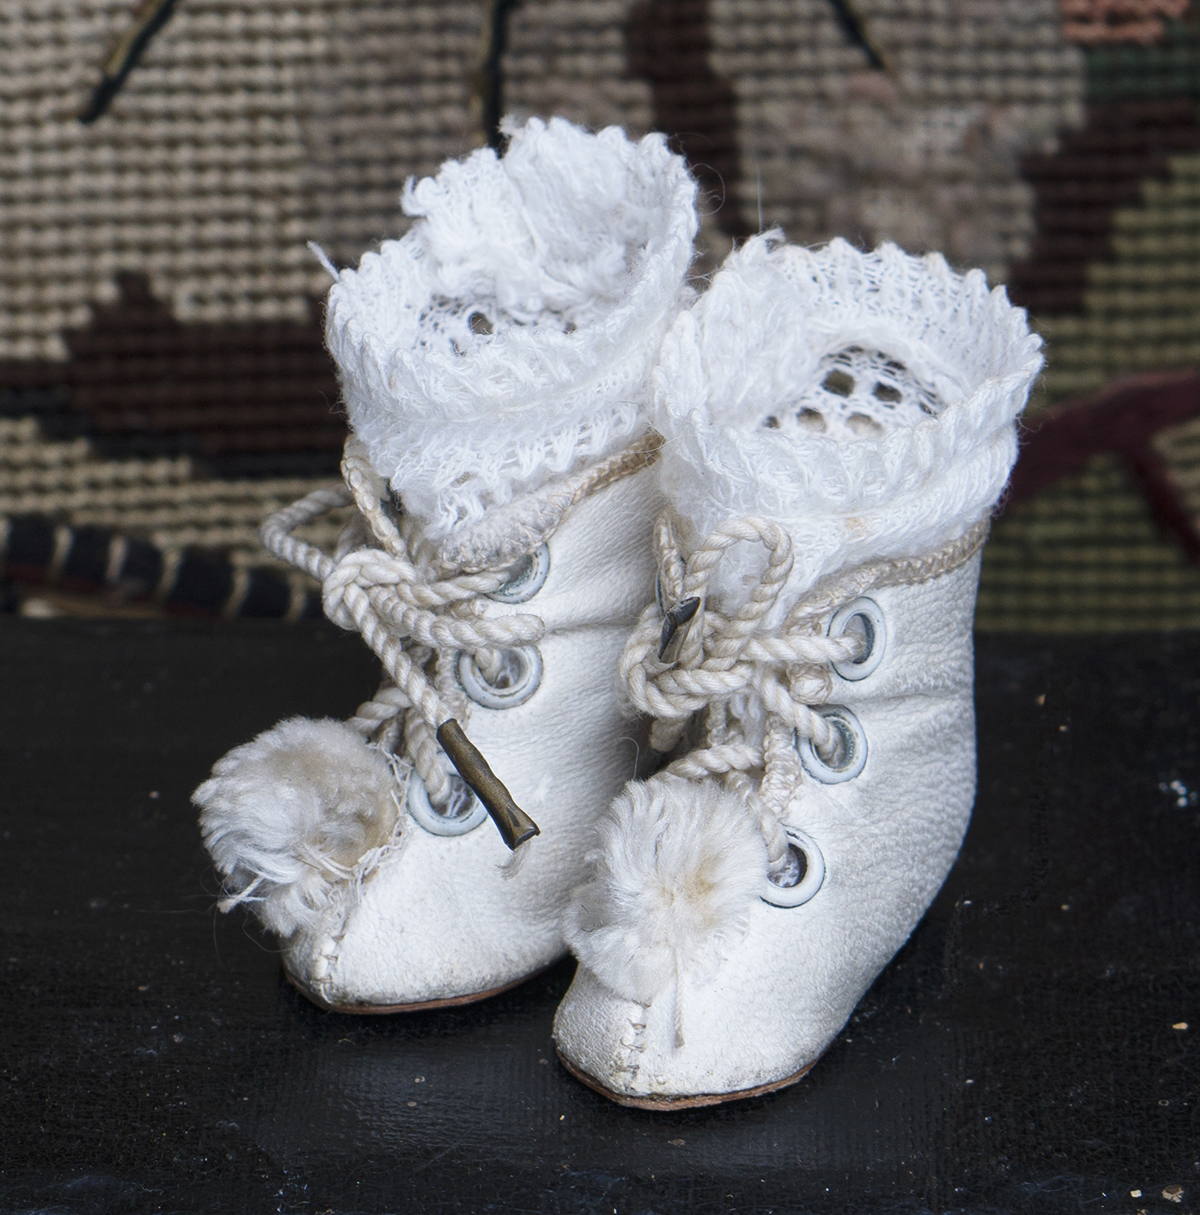 Antique doll boots and socks